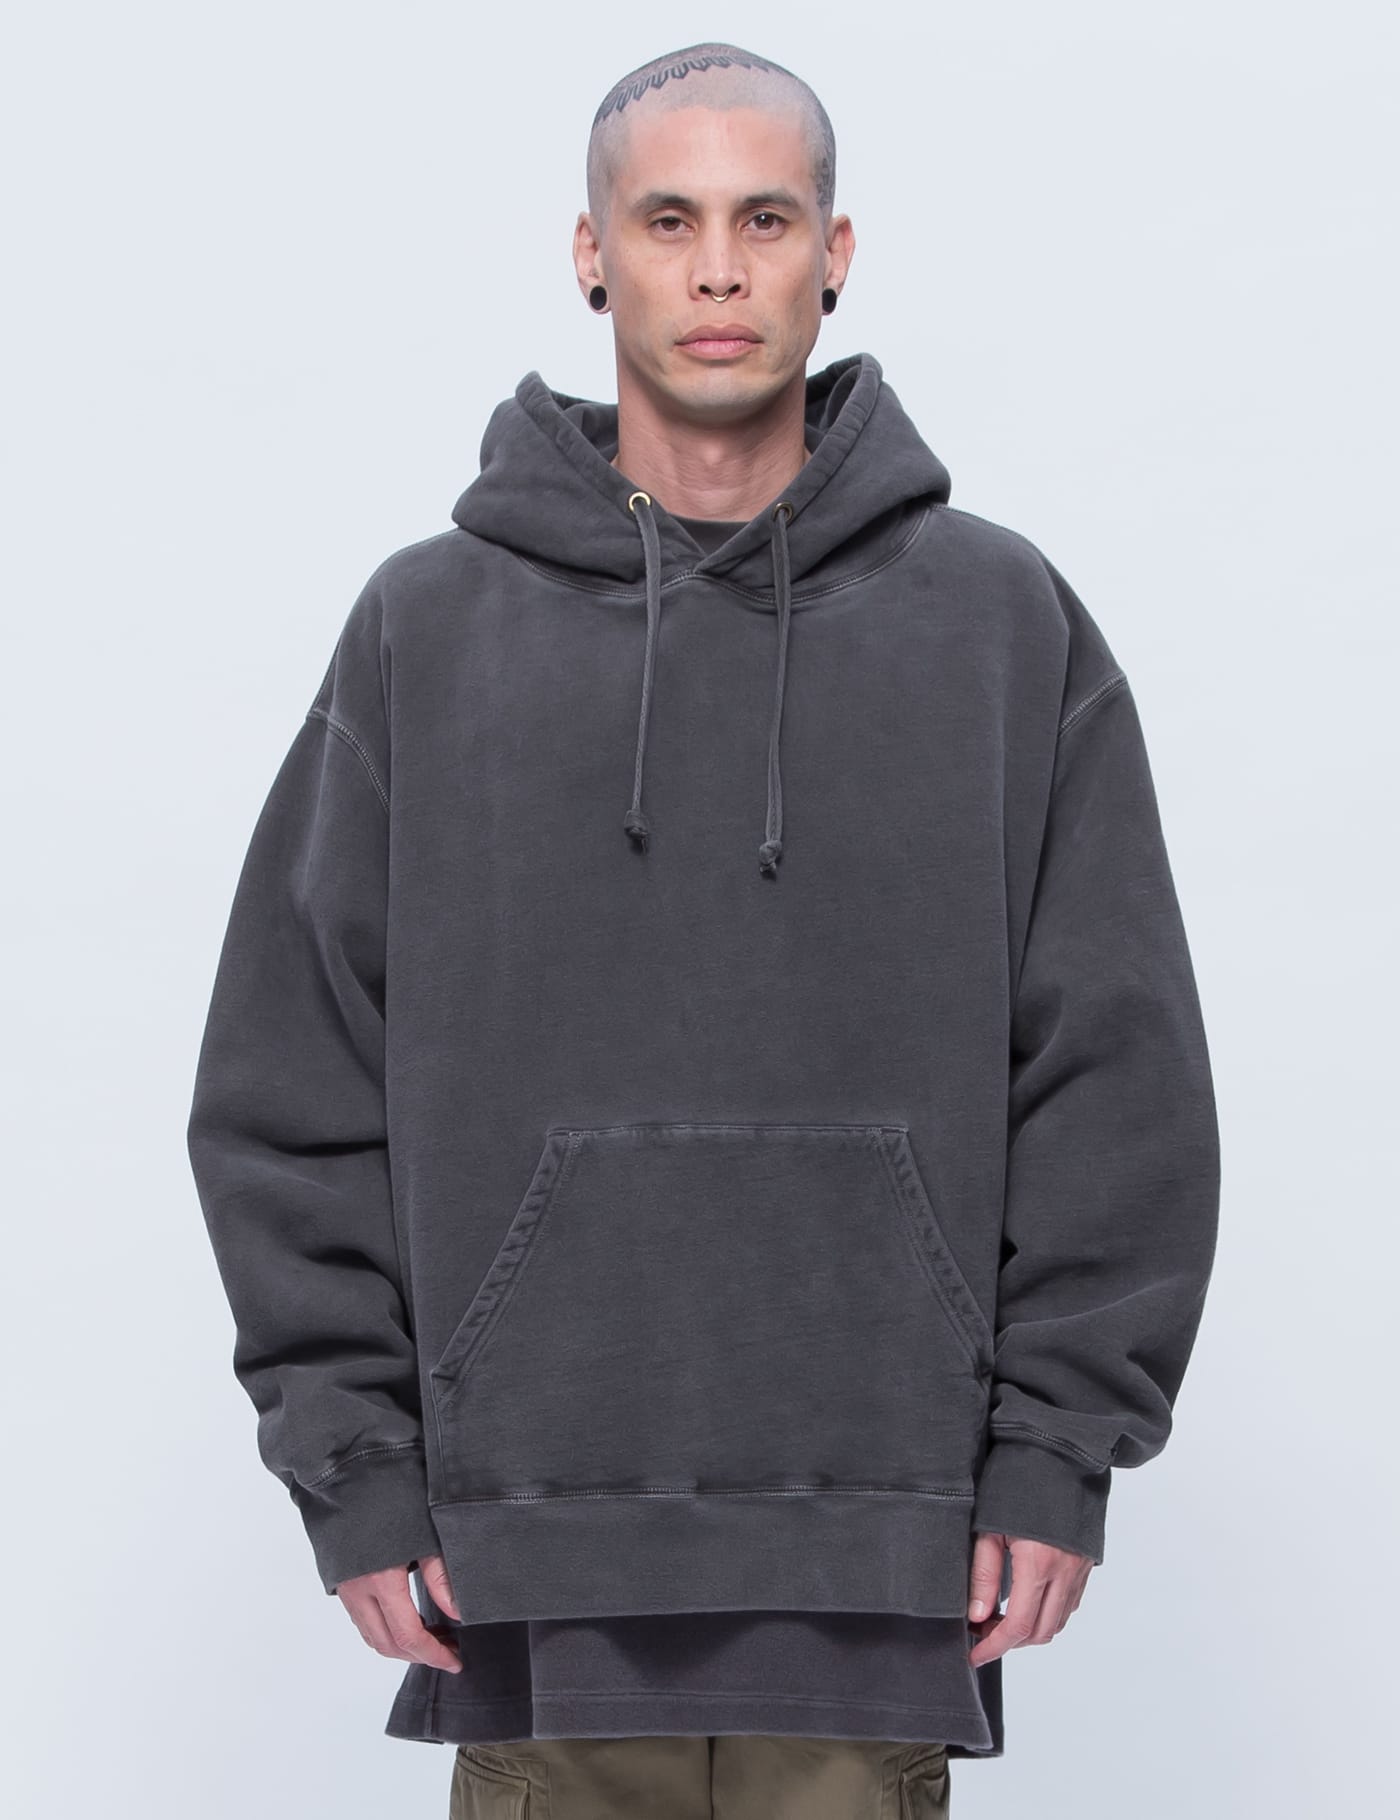 YEEZY Season 3 - Relaxed Fit Hoodie | HBX - Globally Curated